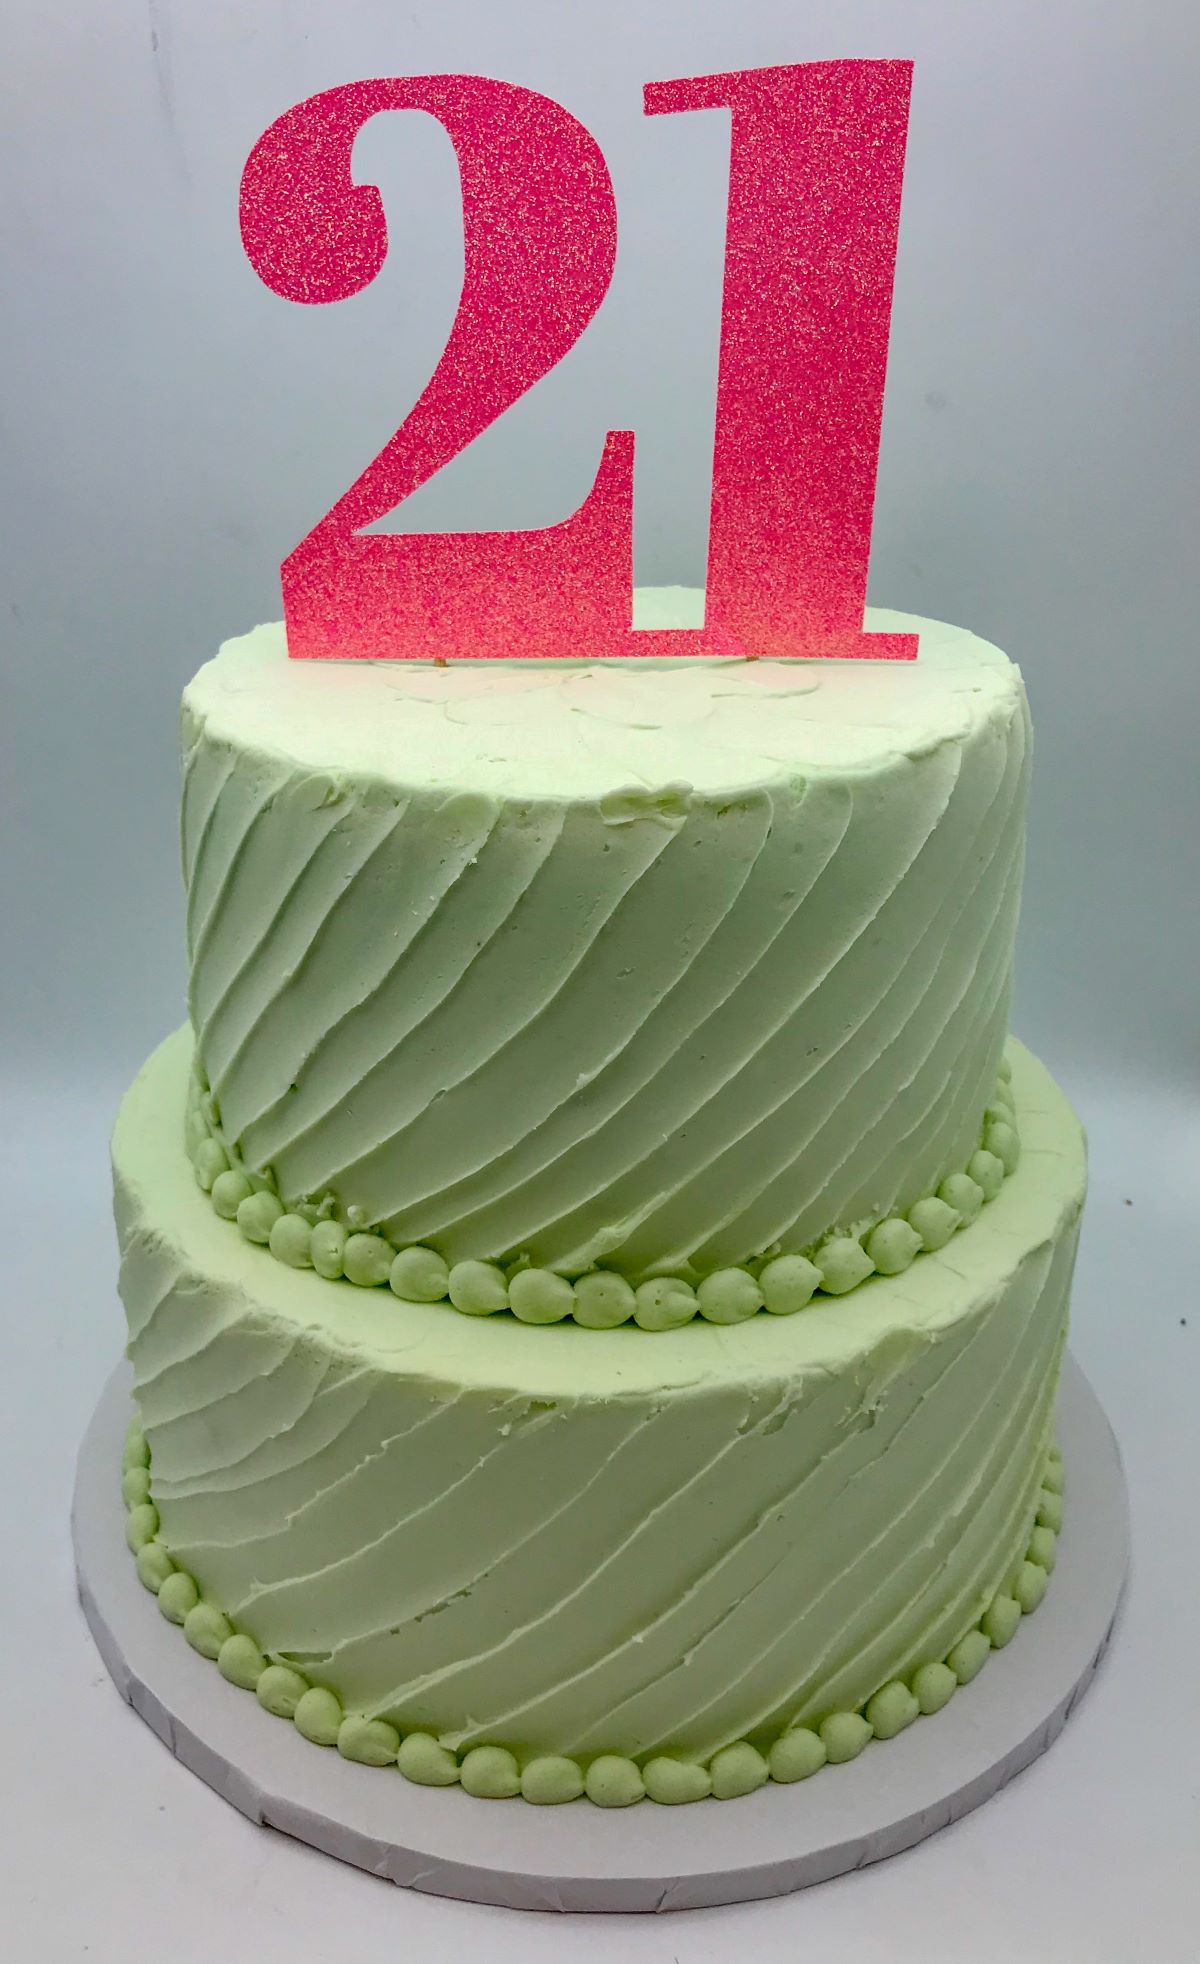 A light green cake with a minimalist diagonal frosting texture and a 21 cake topper.